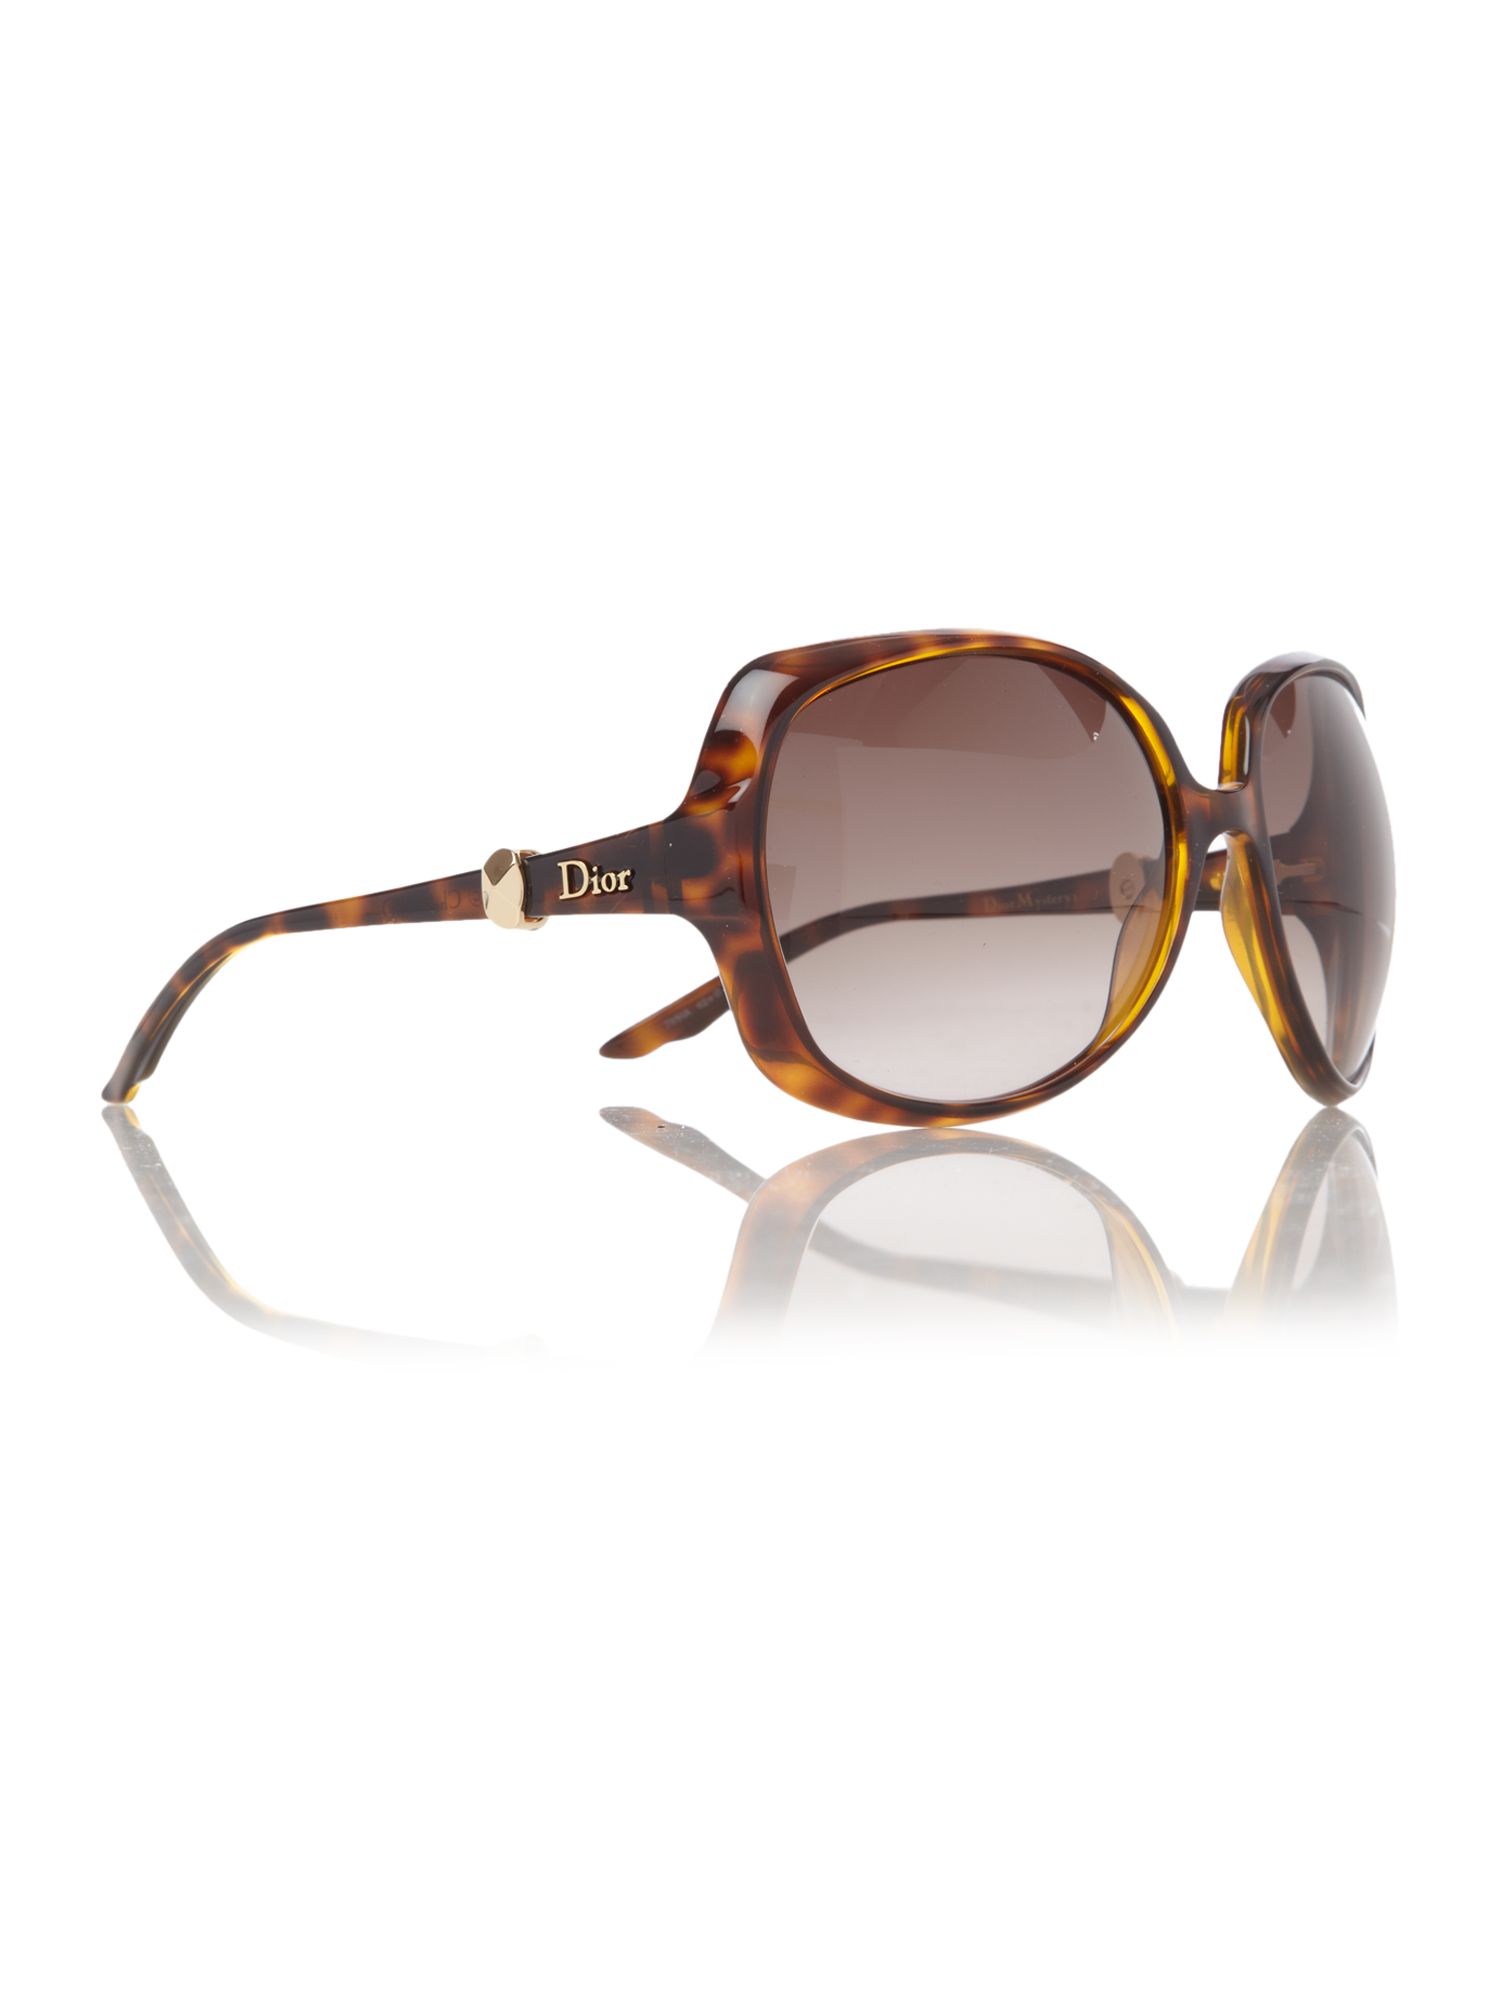 Dior Ladies Diormystery1 Sunglasses in Brown | Lyst